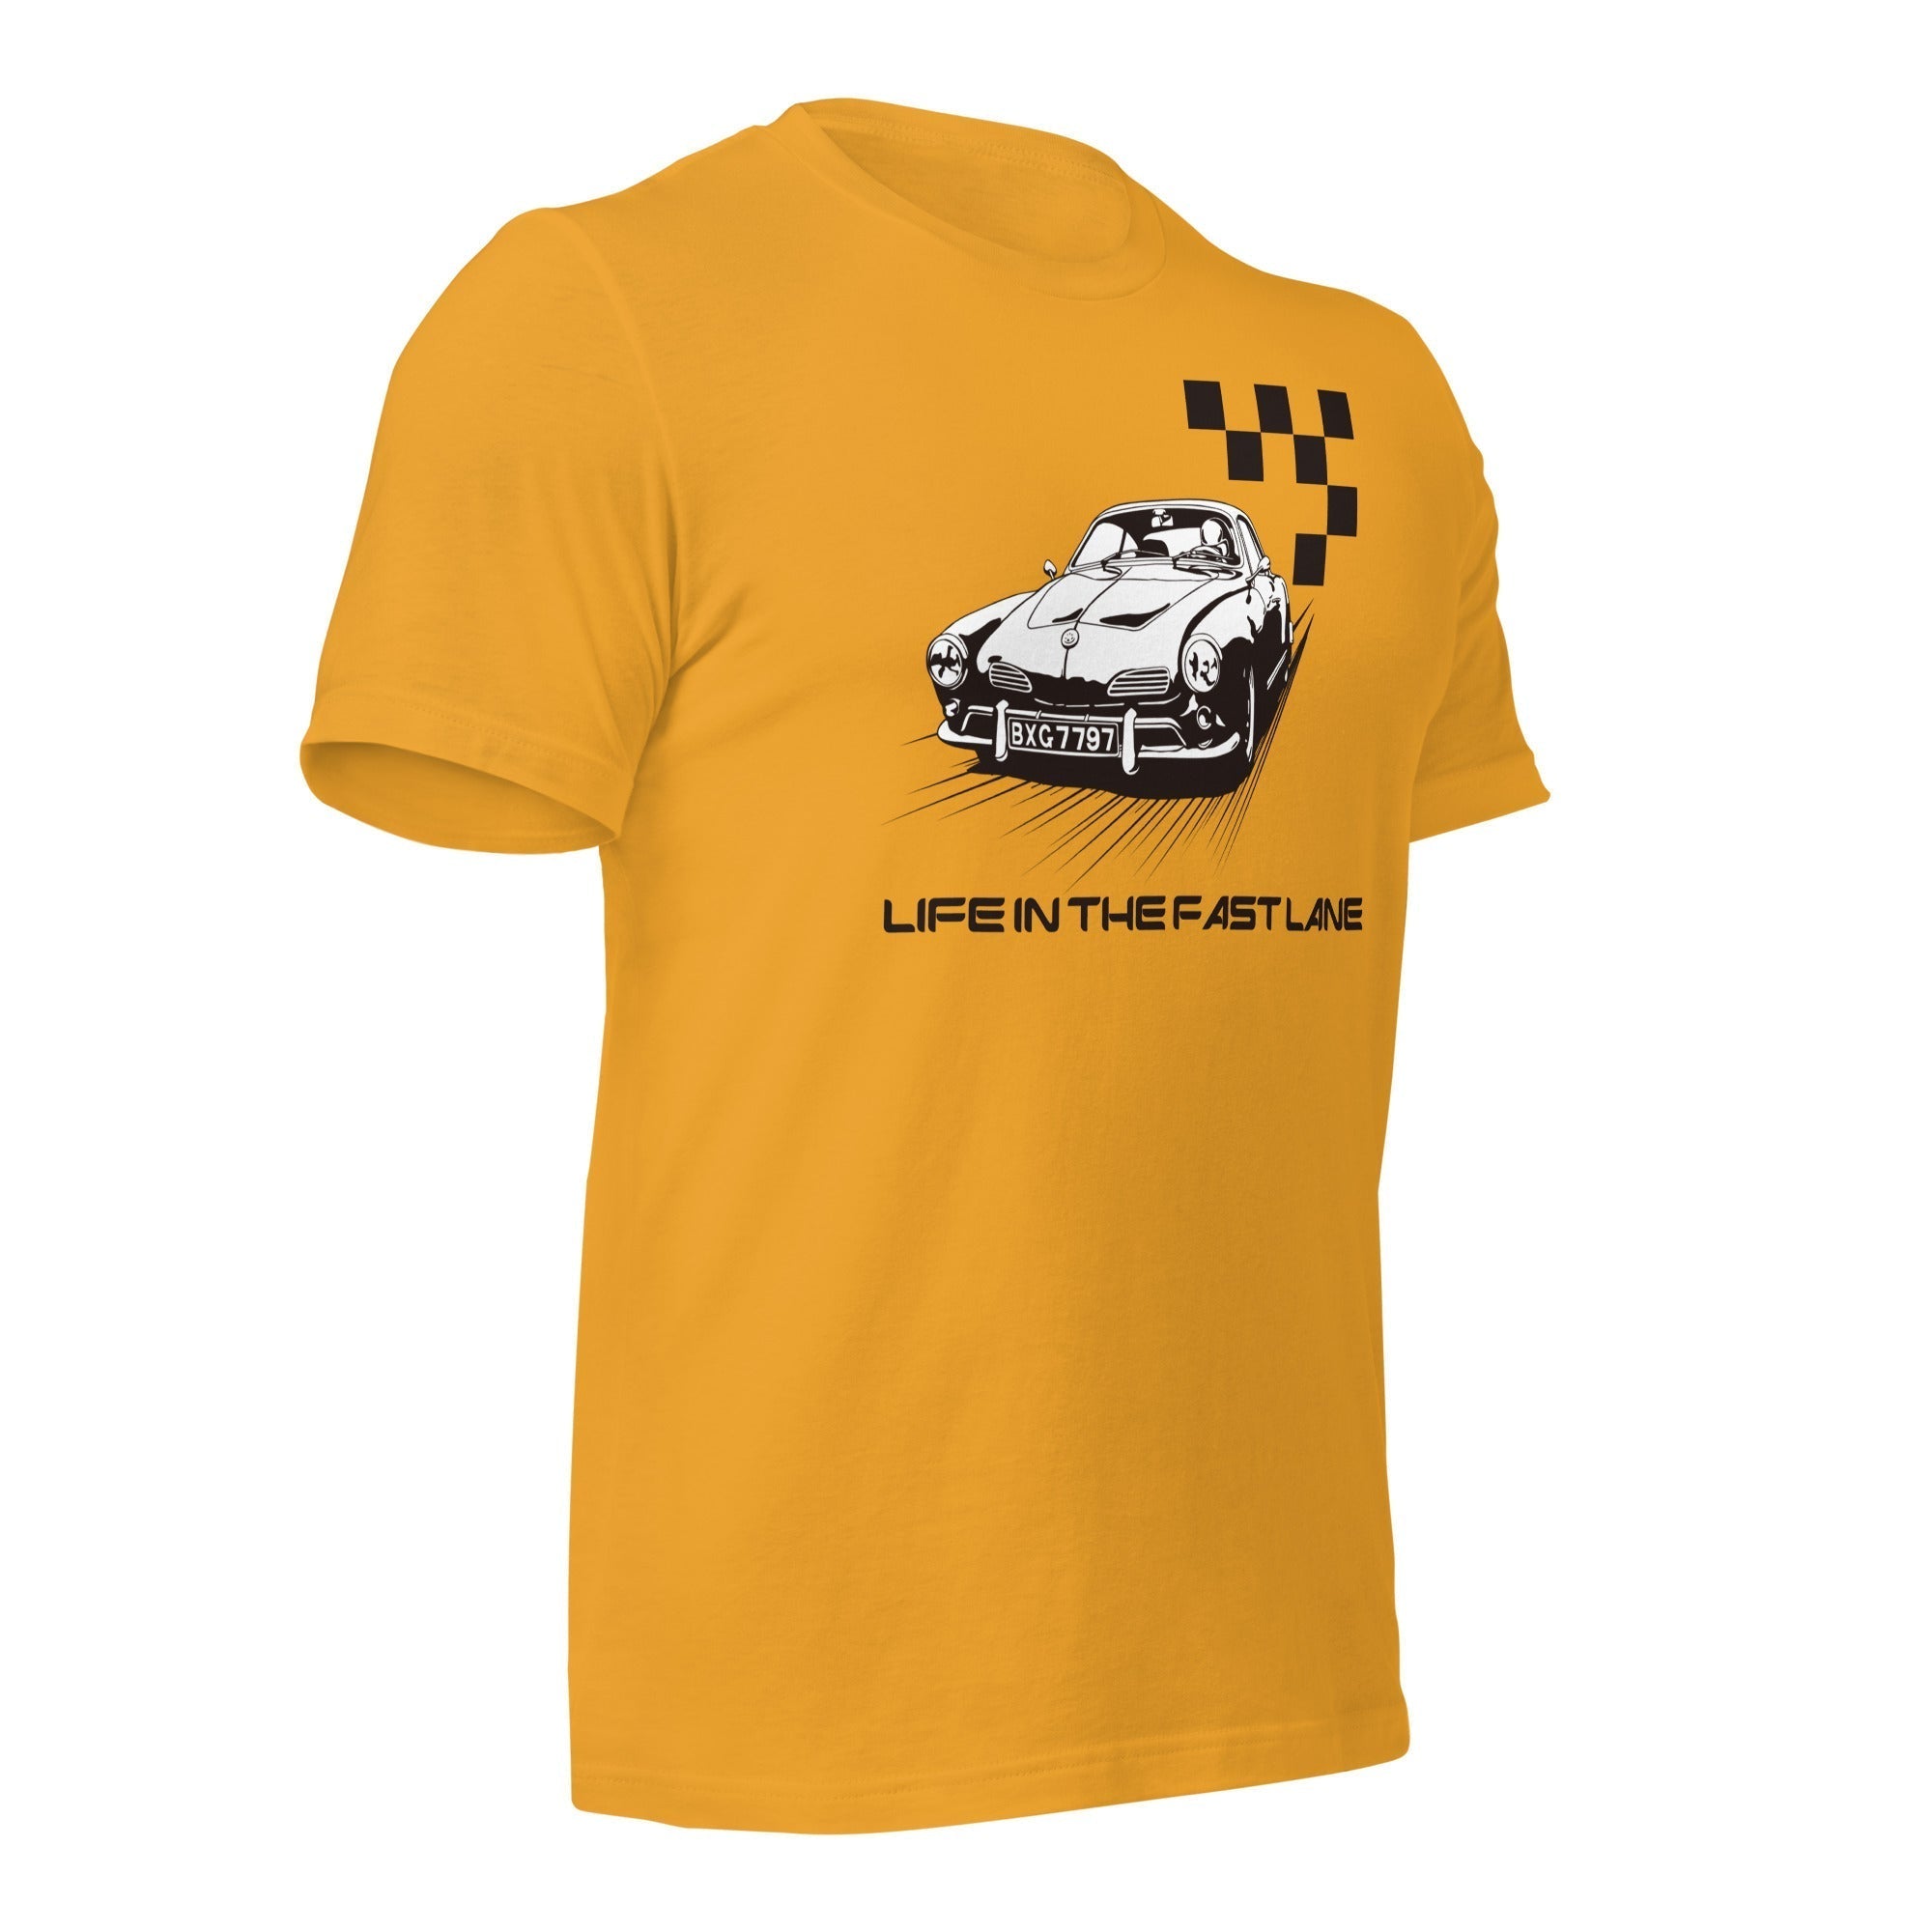 Unisex Staple T-Shirt - Life In The Fast Lane Car Racing - GRAPHIC T-SHIRTS